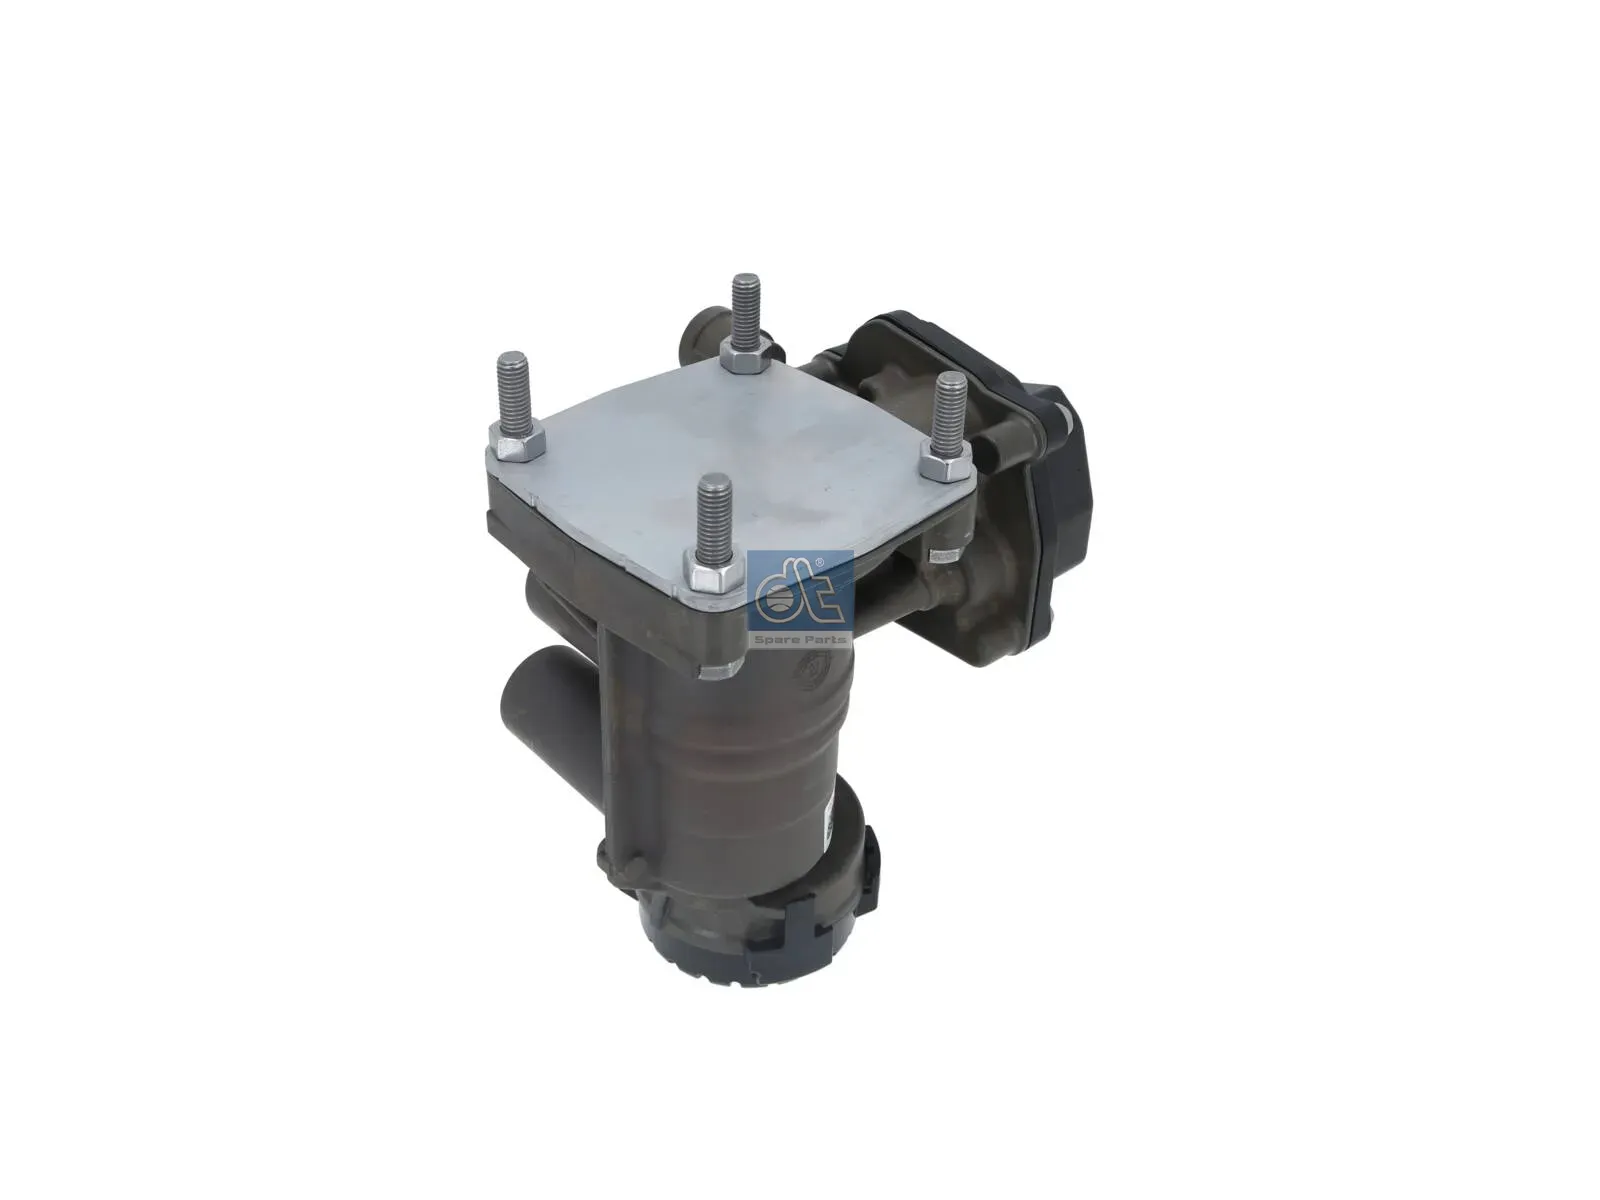 Trailer control valve, reman. / without old core